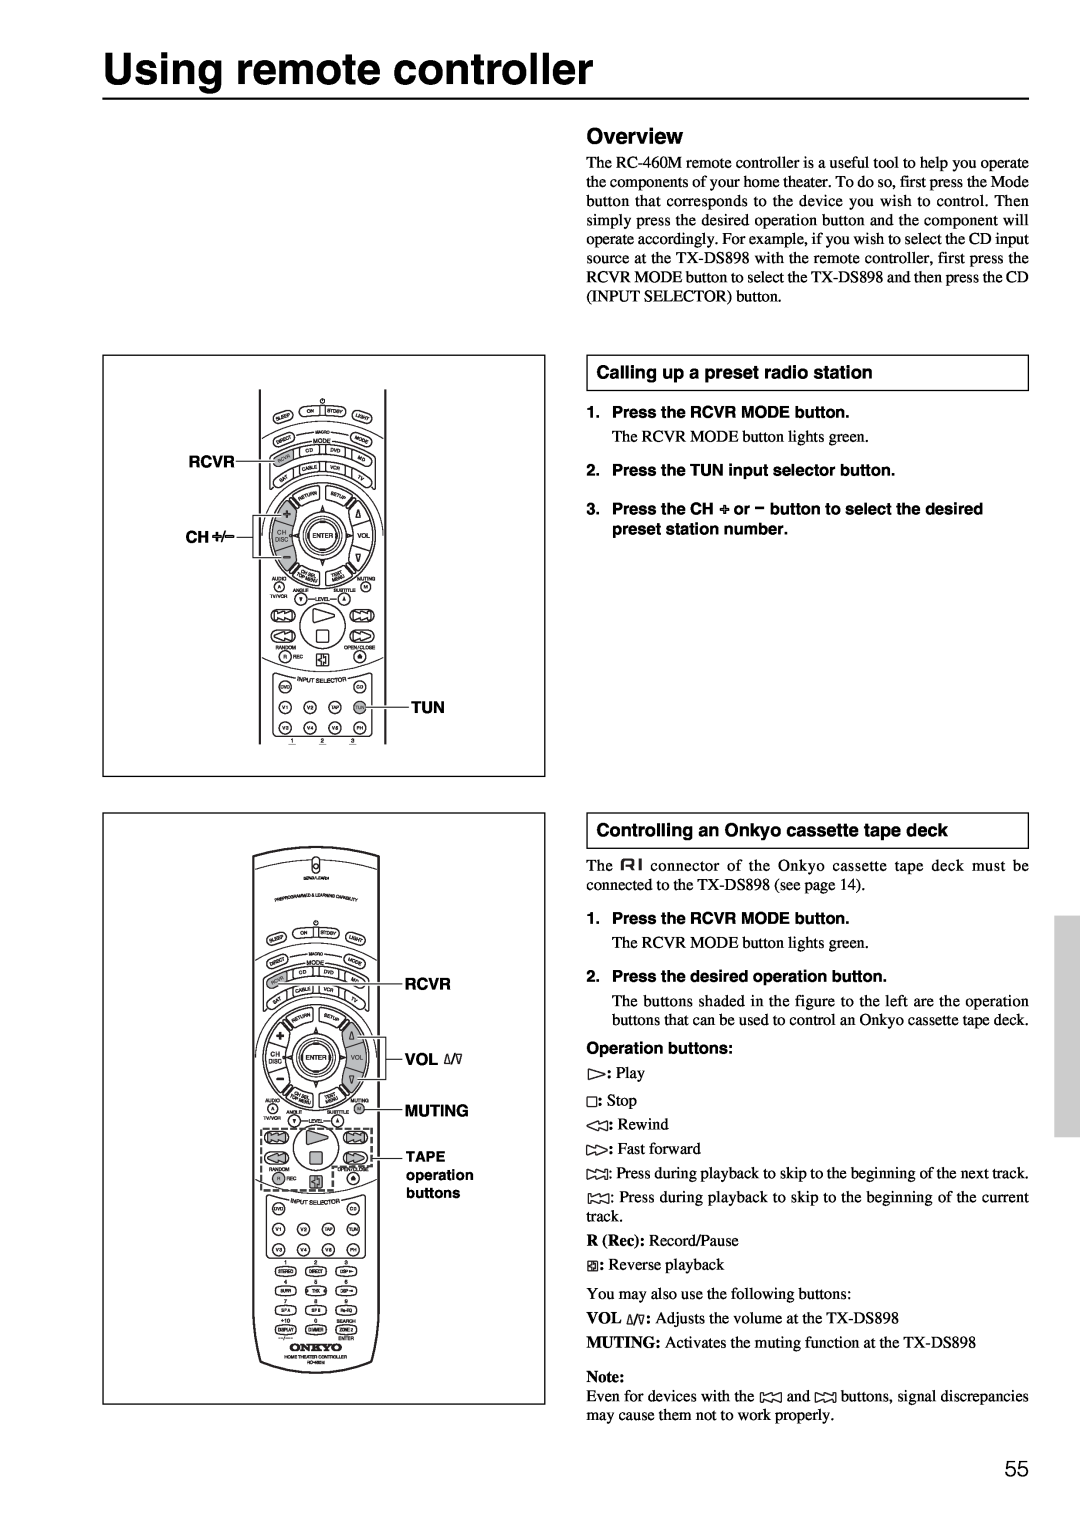 Onkyo TX-DS898 instruction manual Using remote controller, Overview, Calling up a preset radio station 